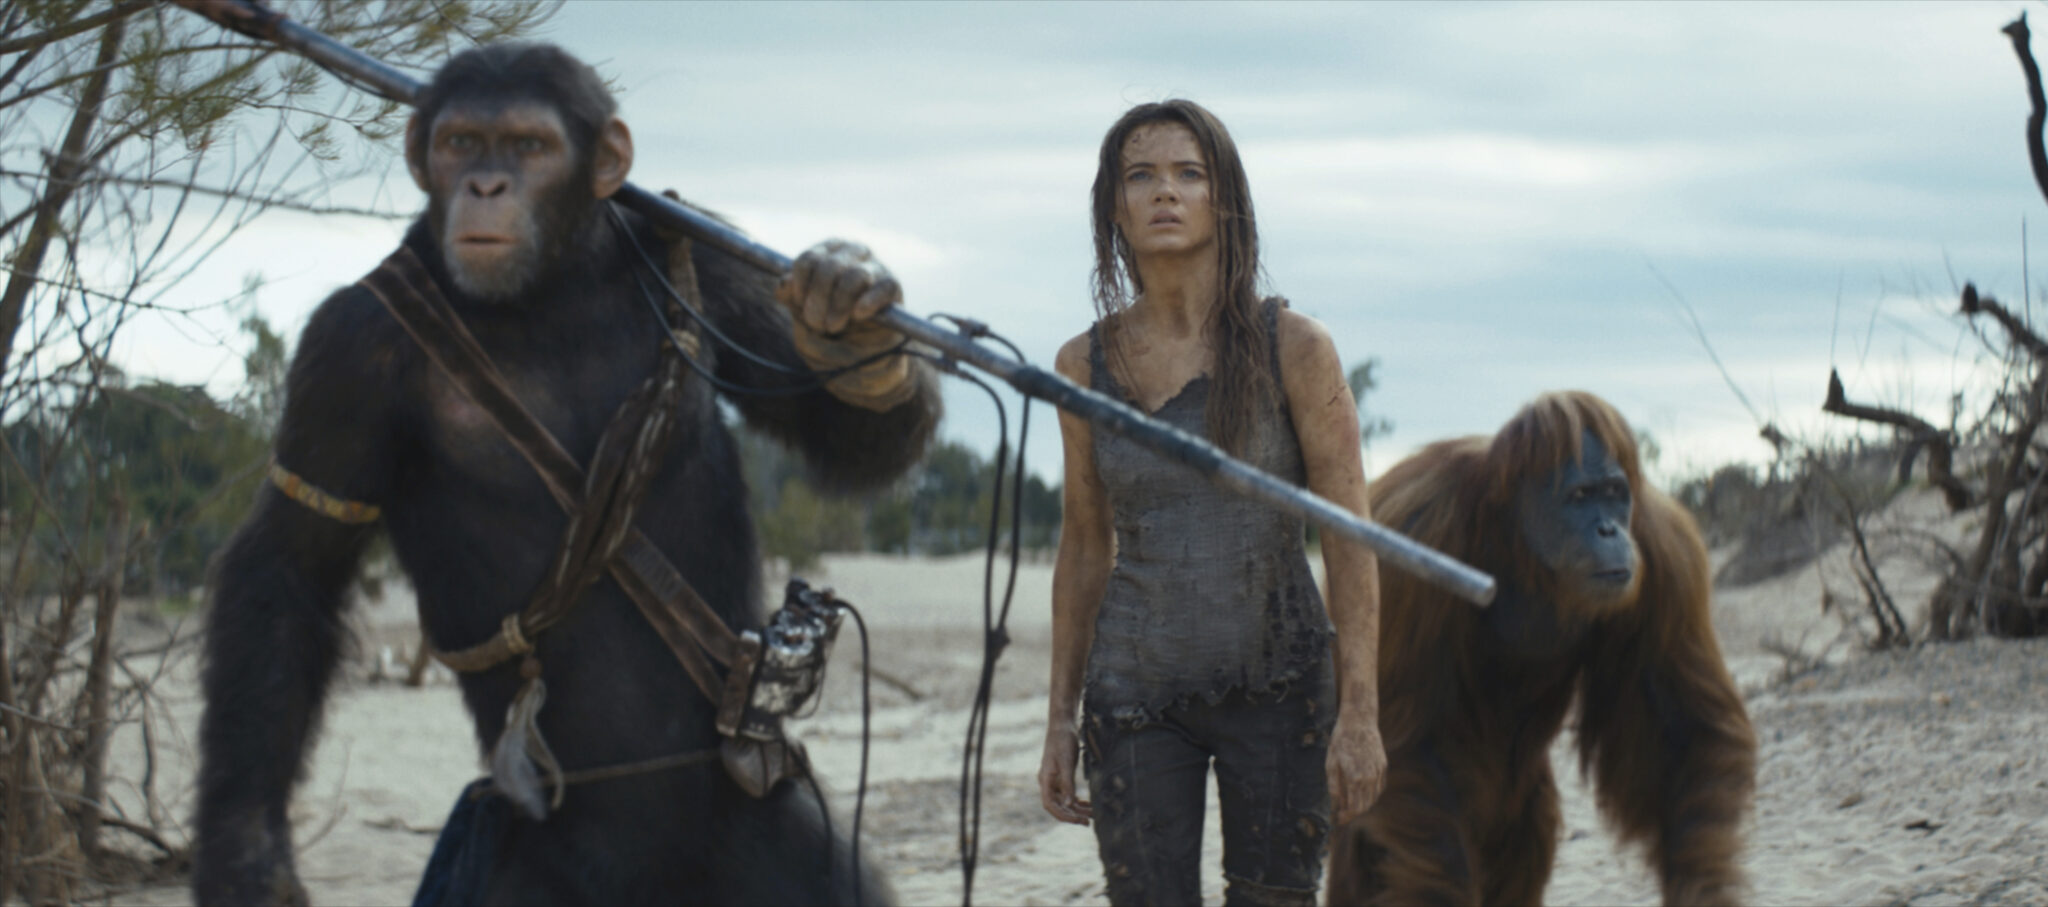 ‘Kingdom of the Planet of the Apes’ opens with $56.5 million